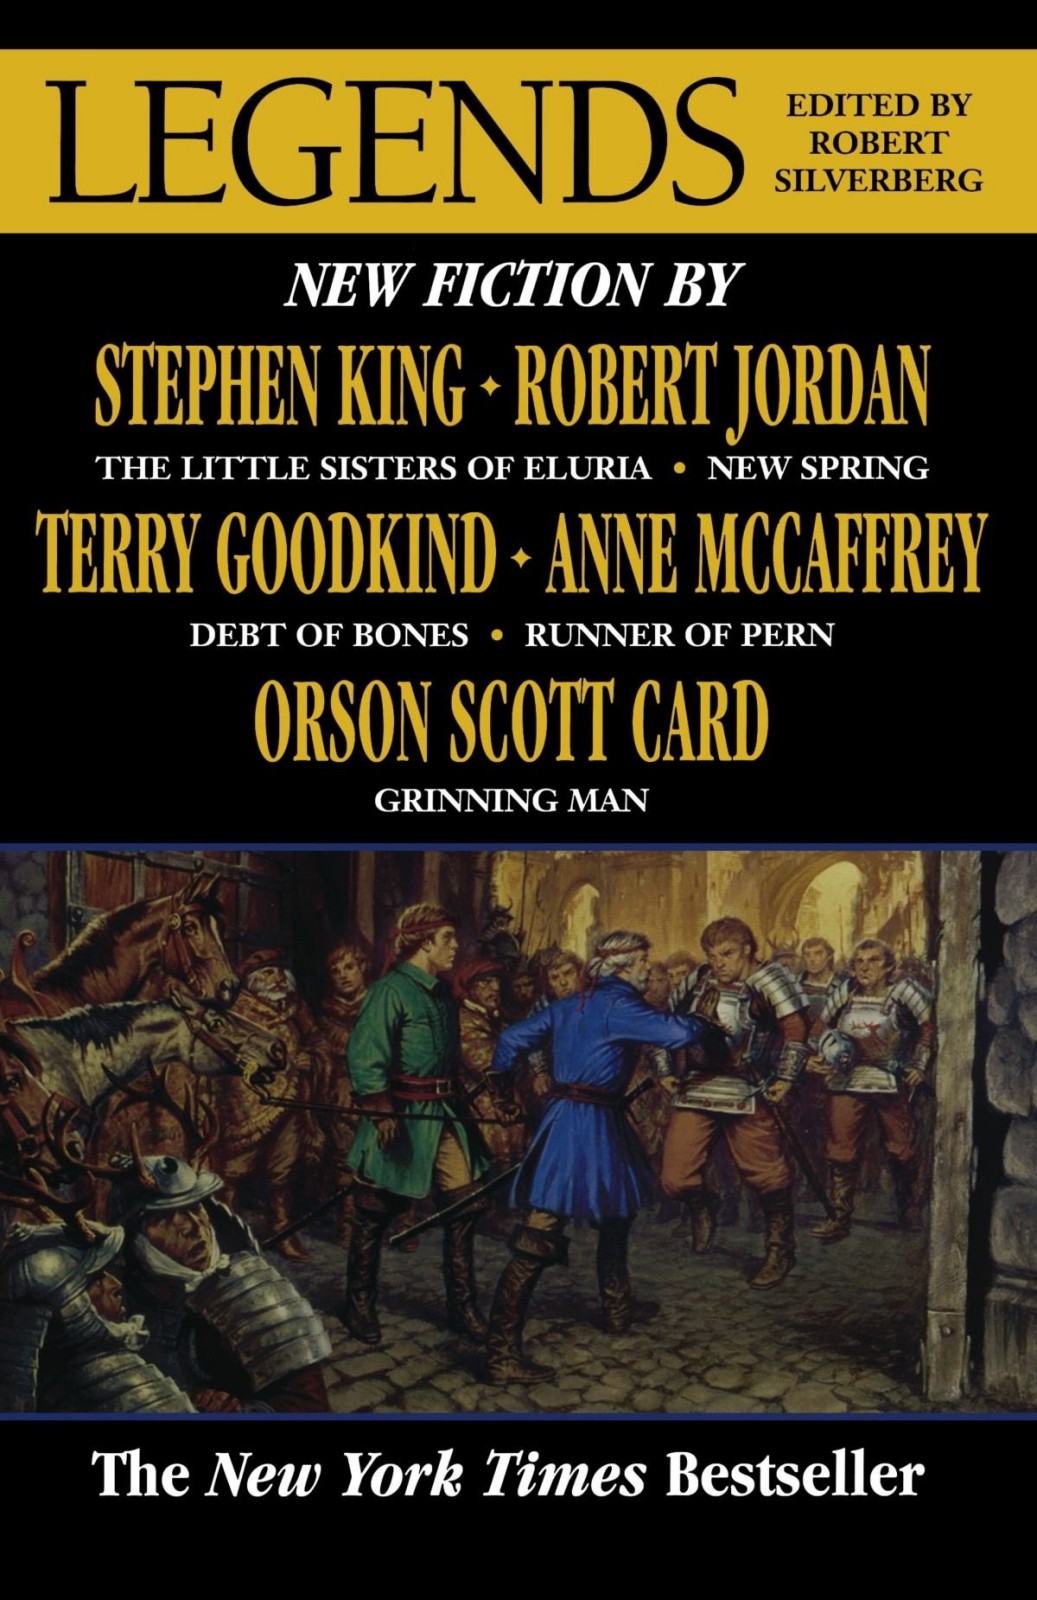 Legends: Stories by the Masters of Modern Fantasy